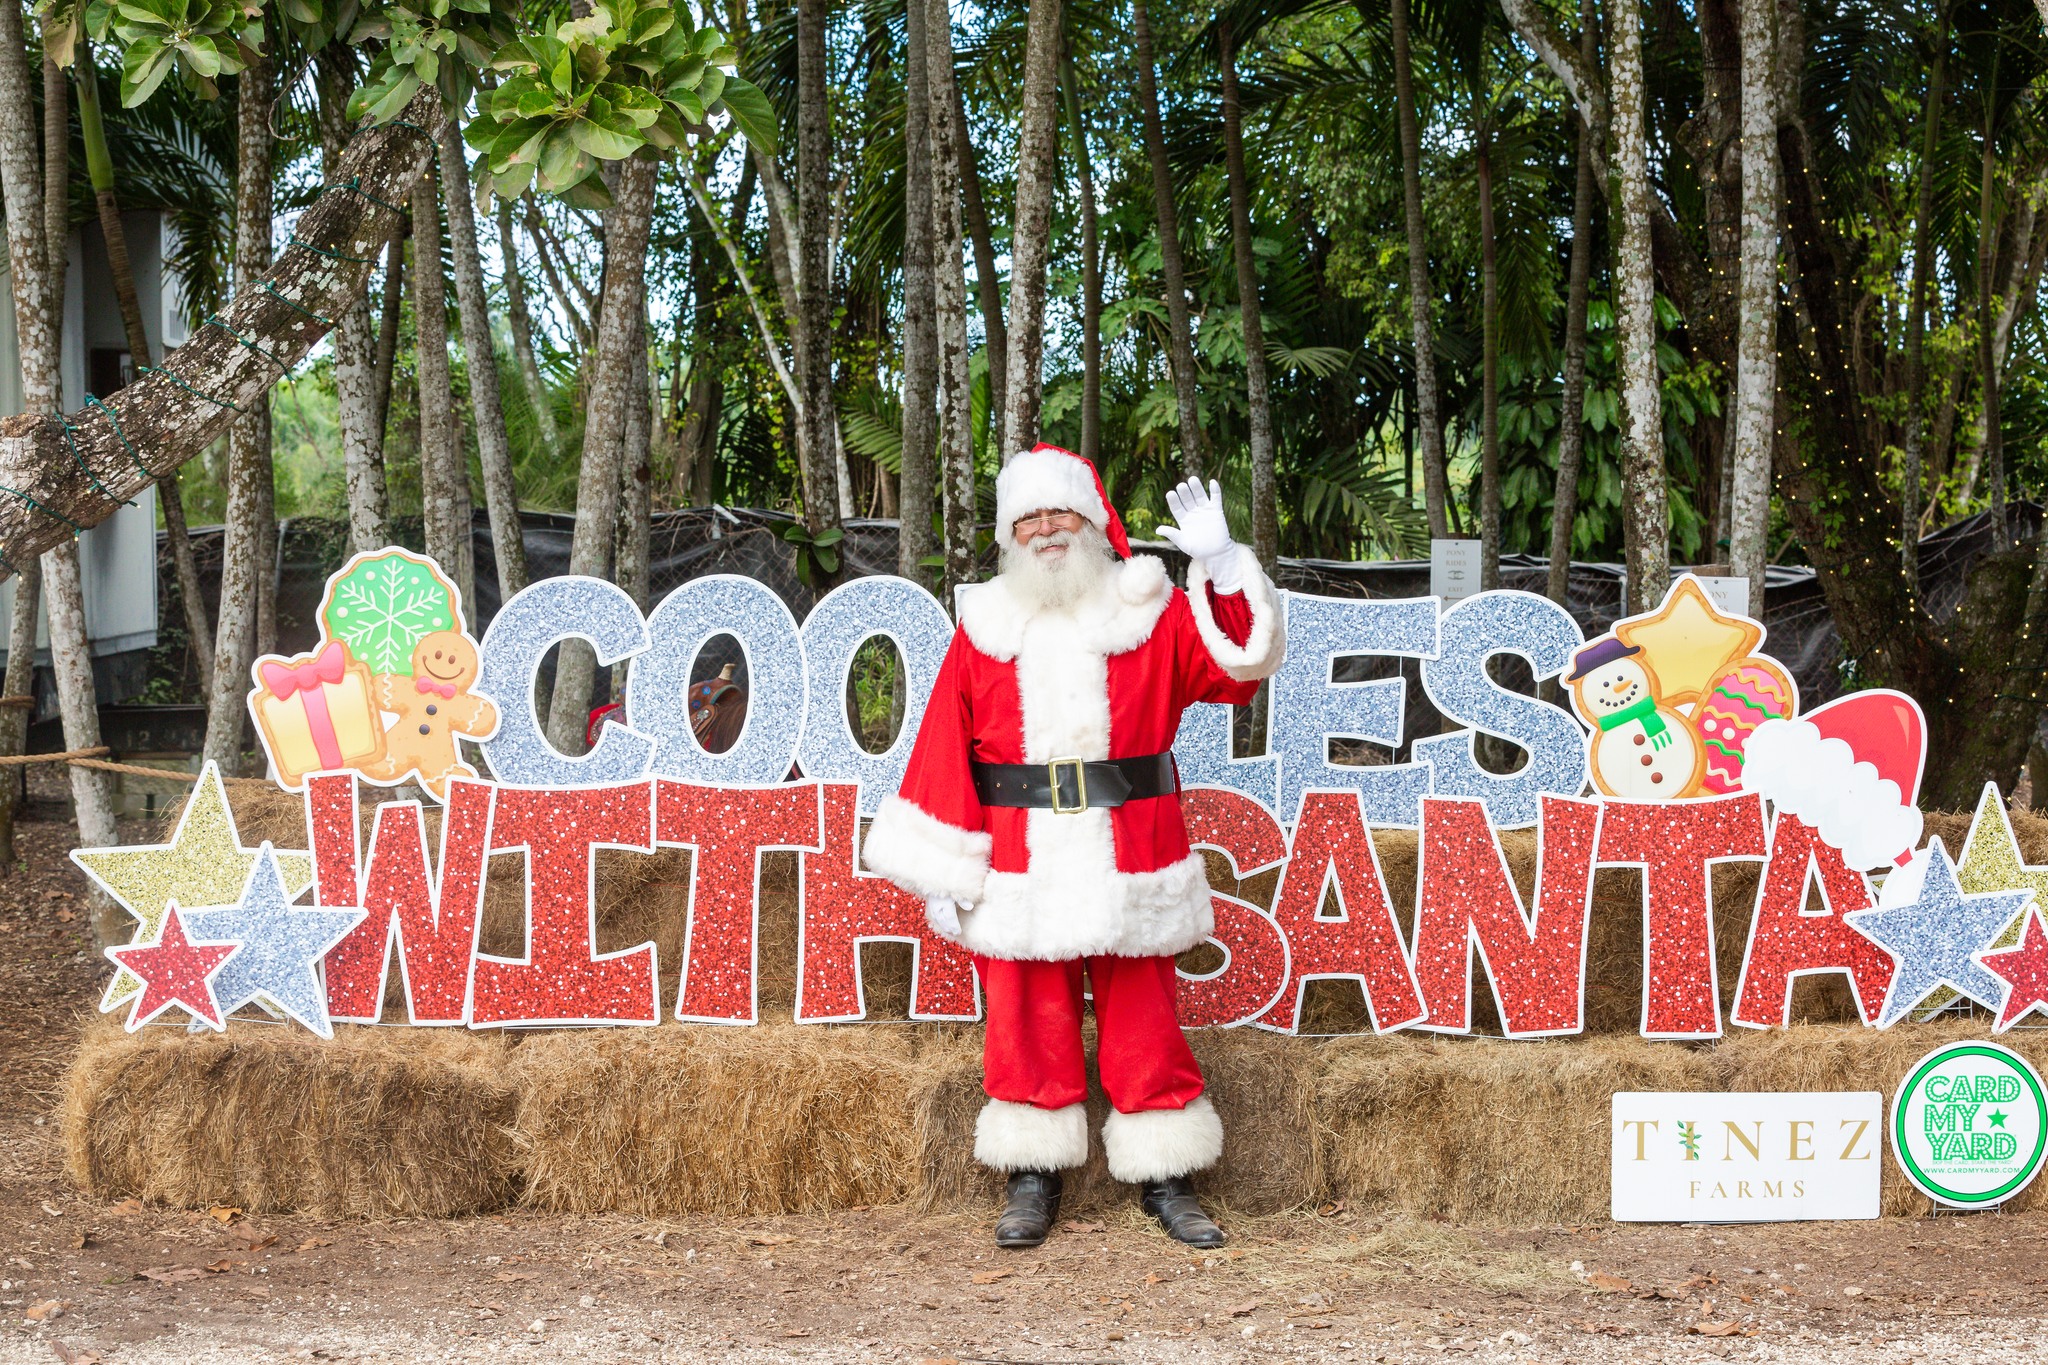 4th Annual Cookies with Santa at Tinez Farms | Event Recap